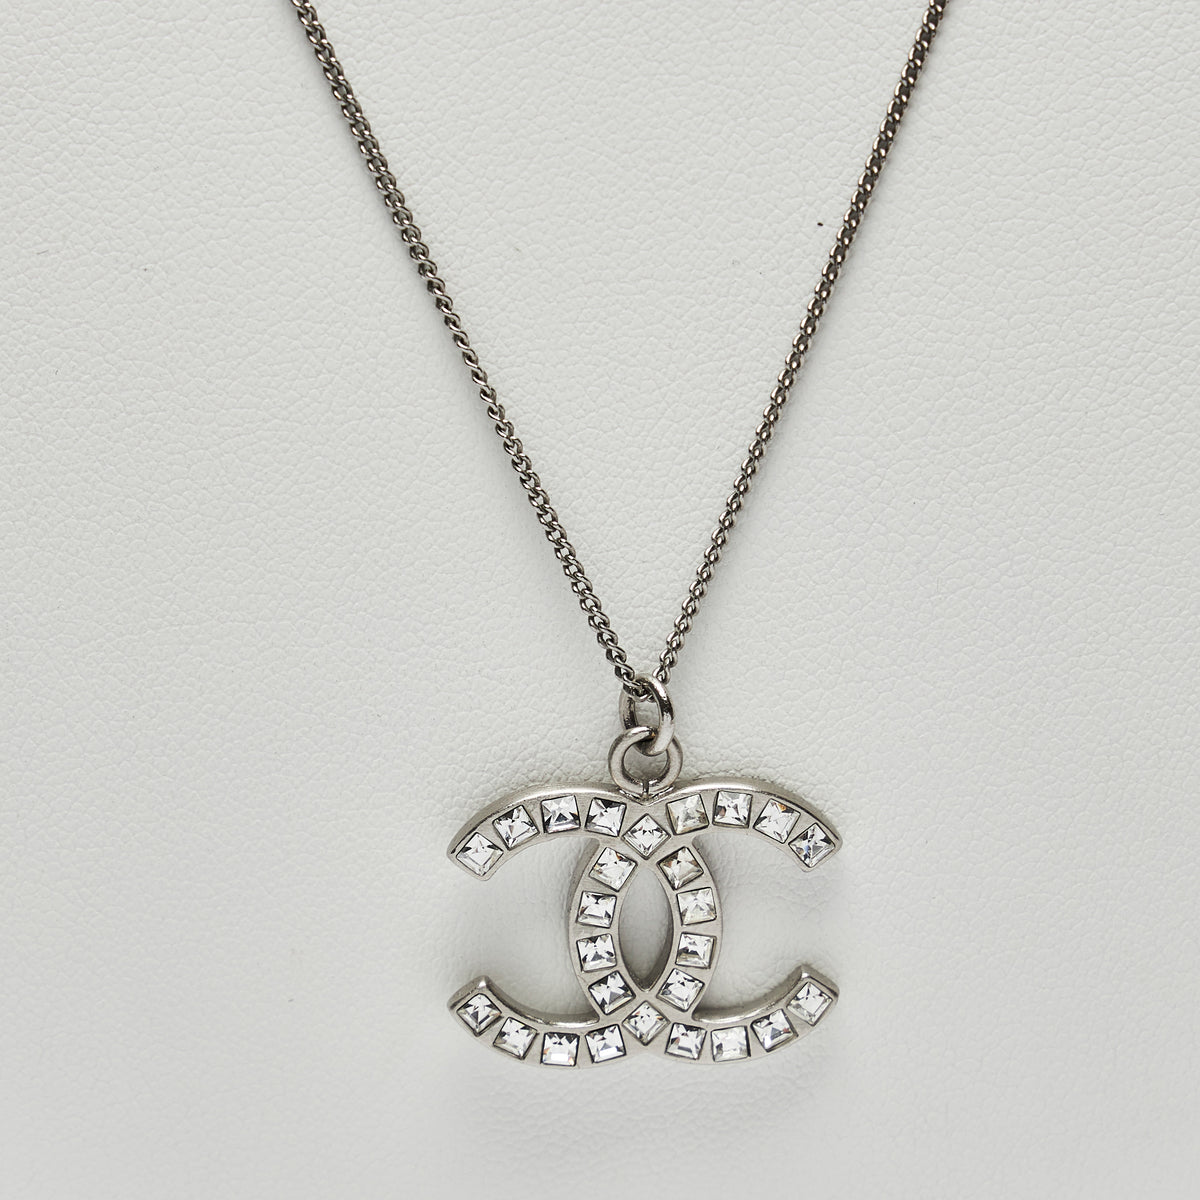 Excellent Pre-Loved Silver Tone Logo Pendant Necklace with Square Crystals Embellishment.(logo)